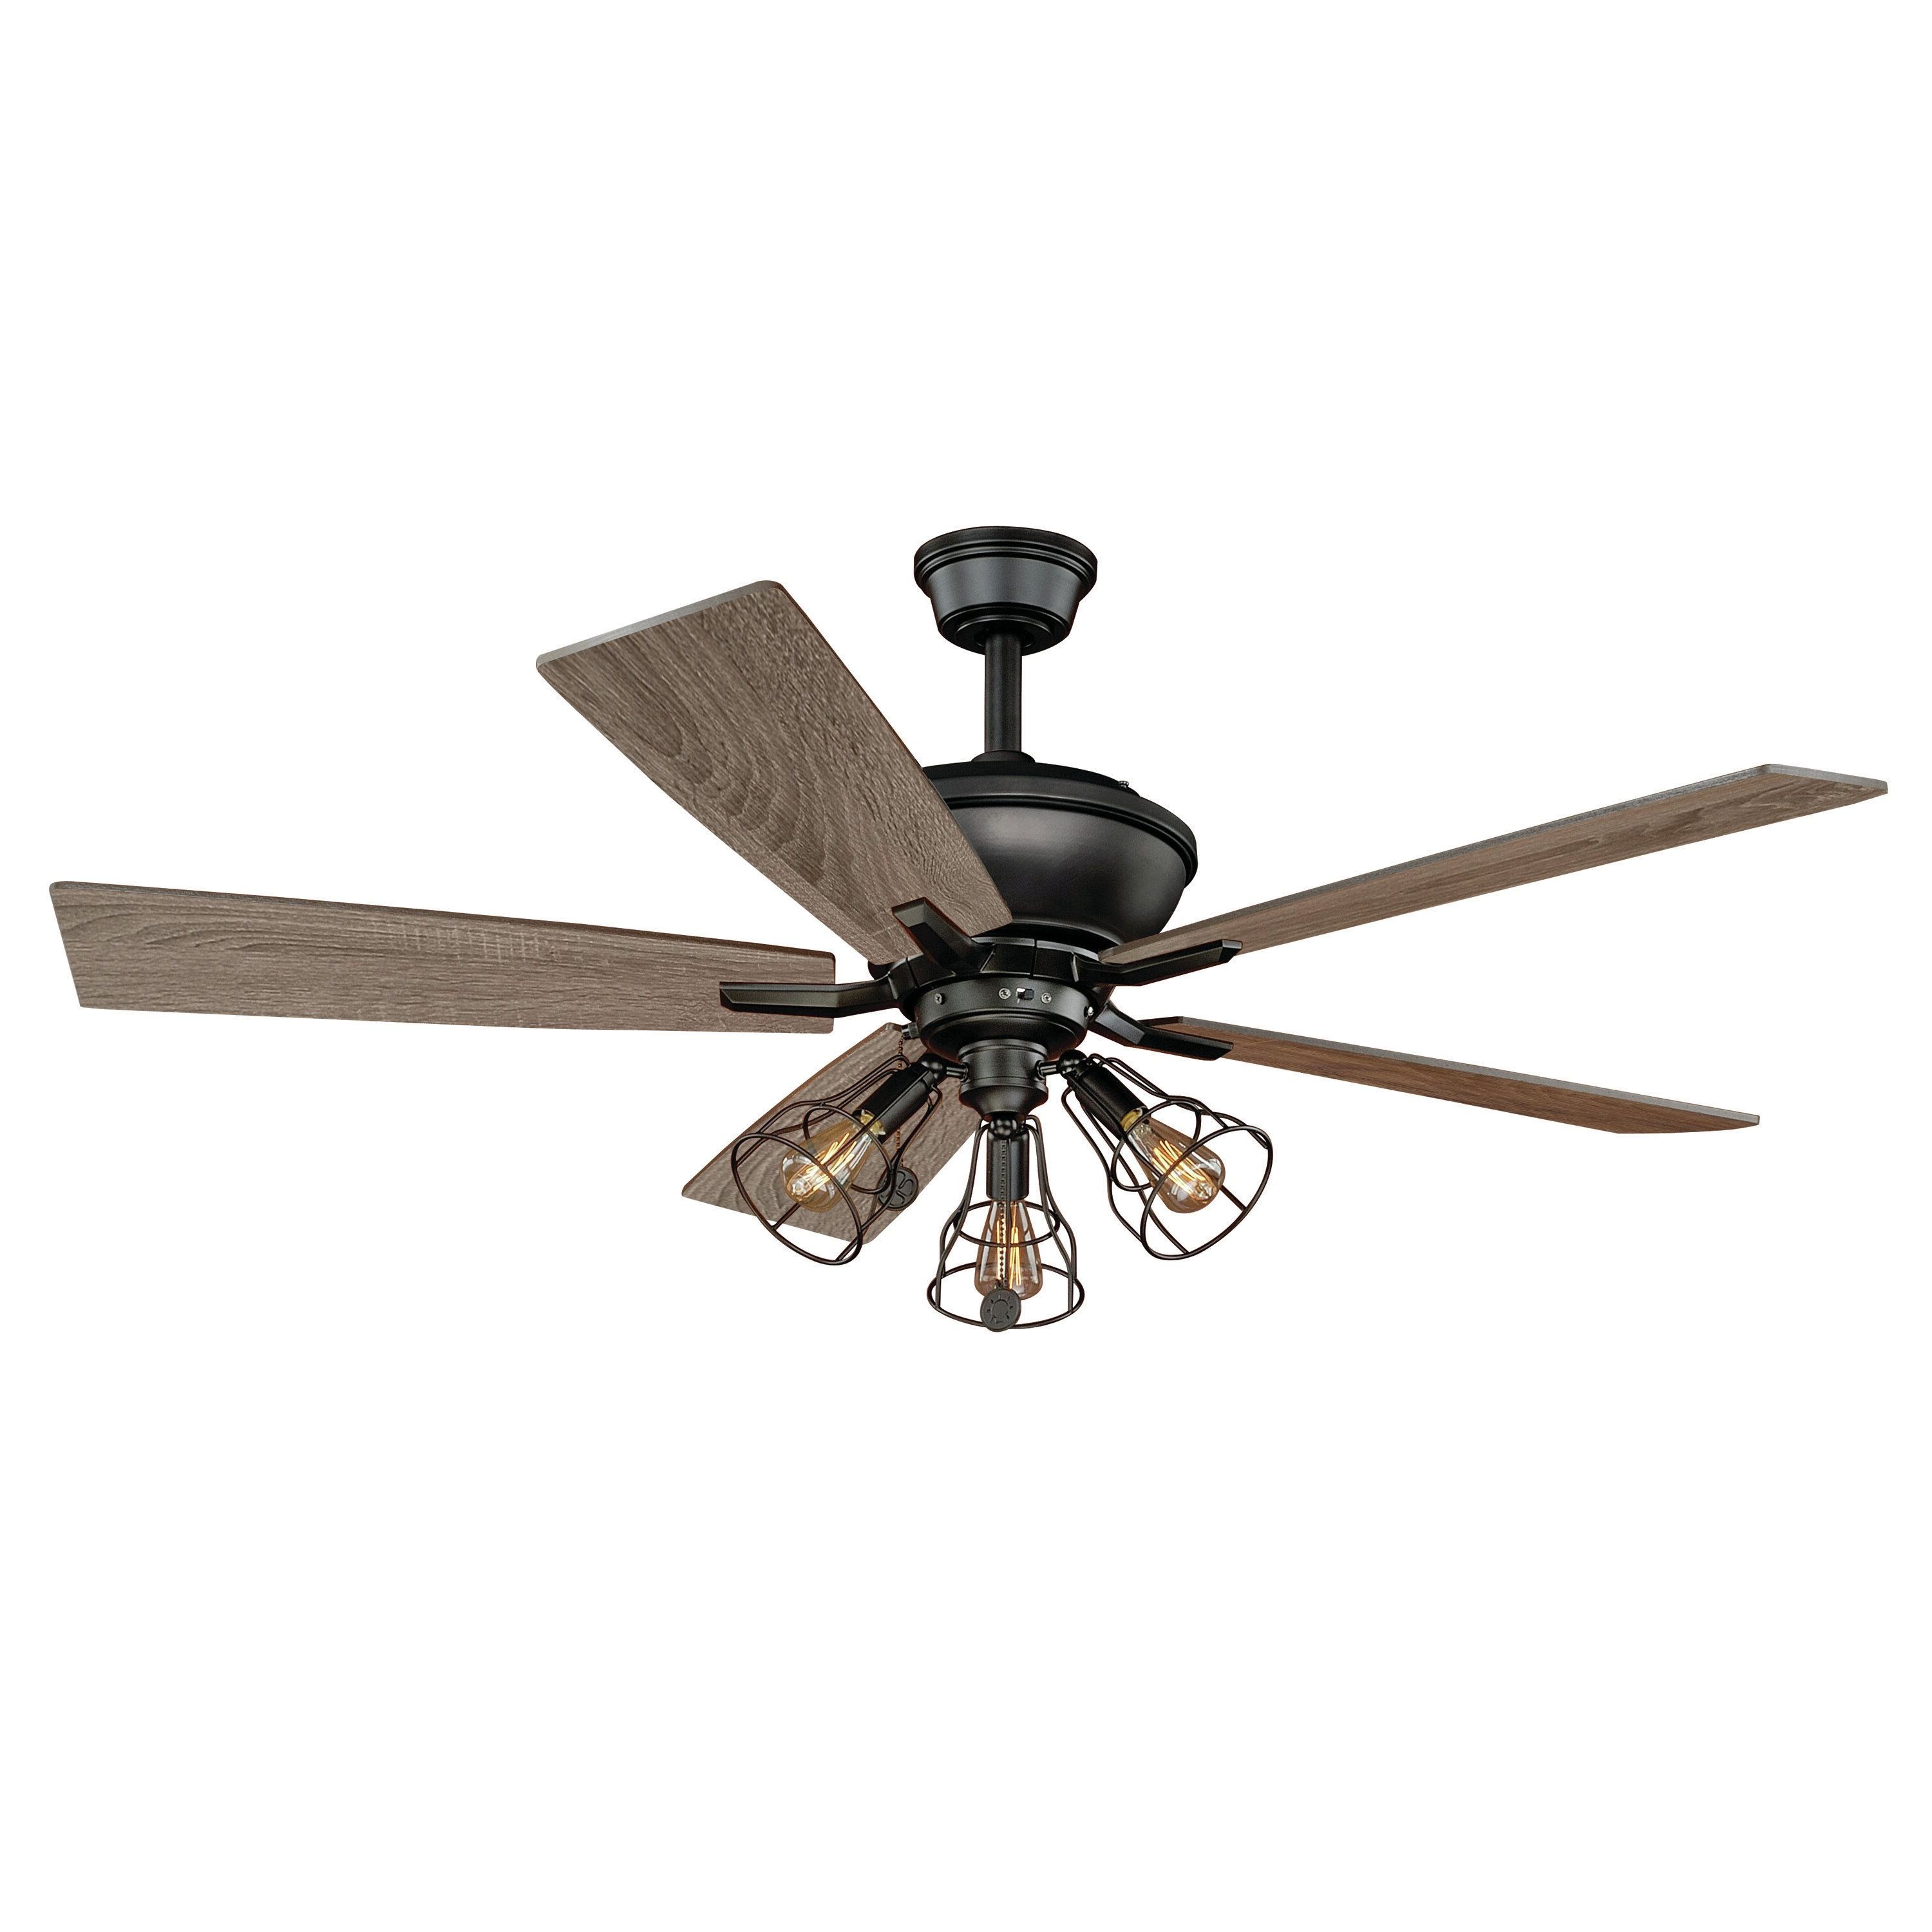 Newest 52" Clybourn 5 Blade Ceiling Fan Within Hamlett 5 Blade Ceiling Fans (View 4 of 20)